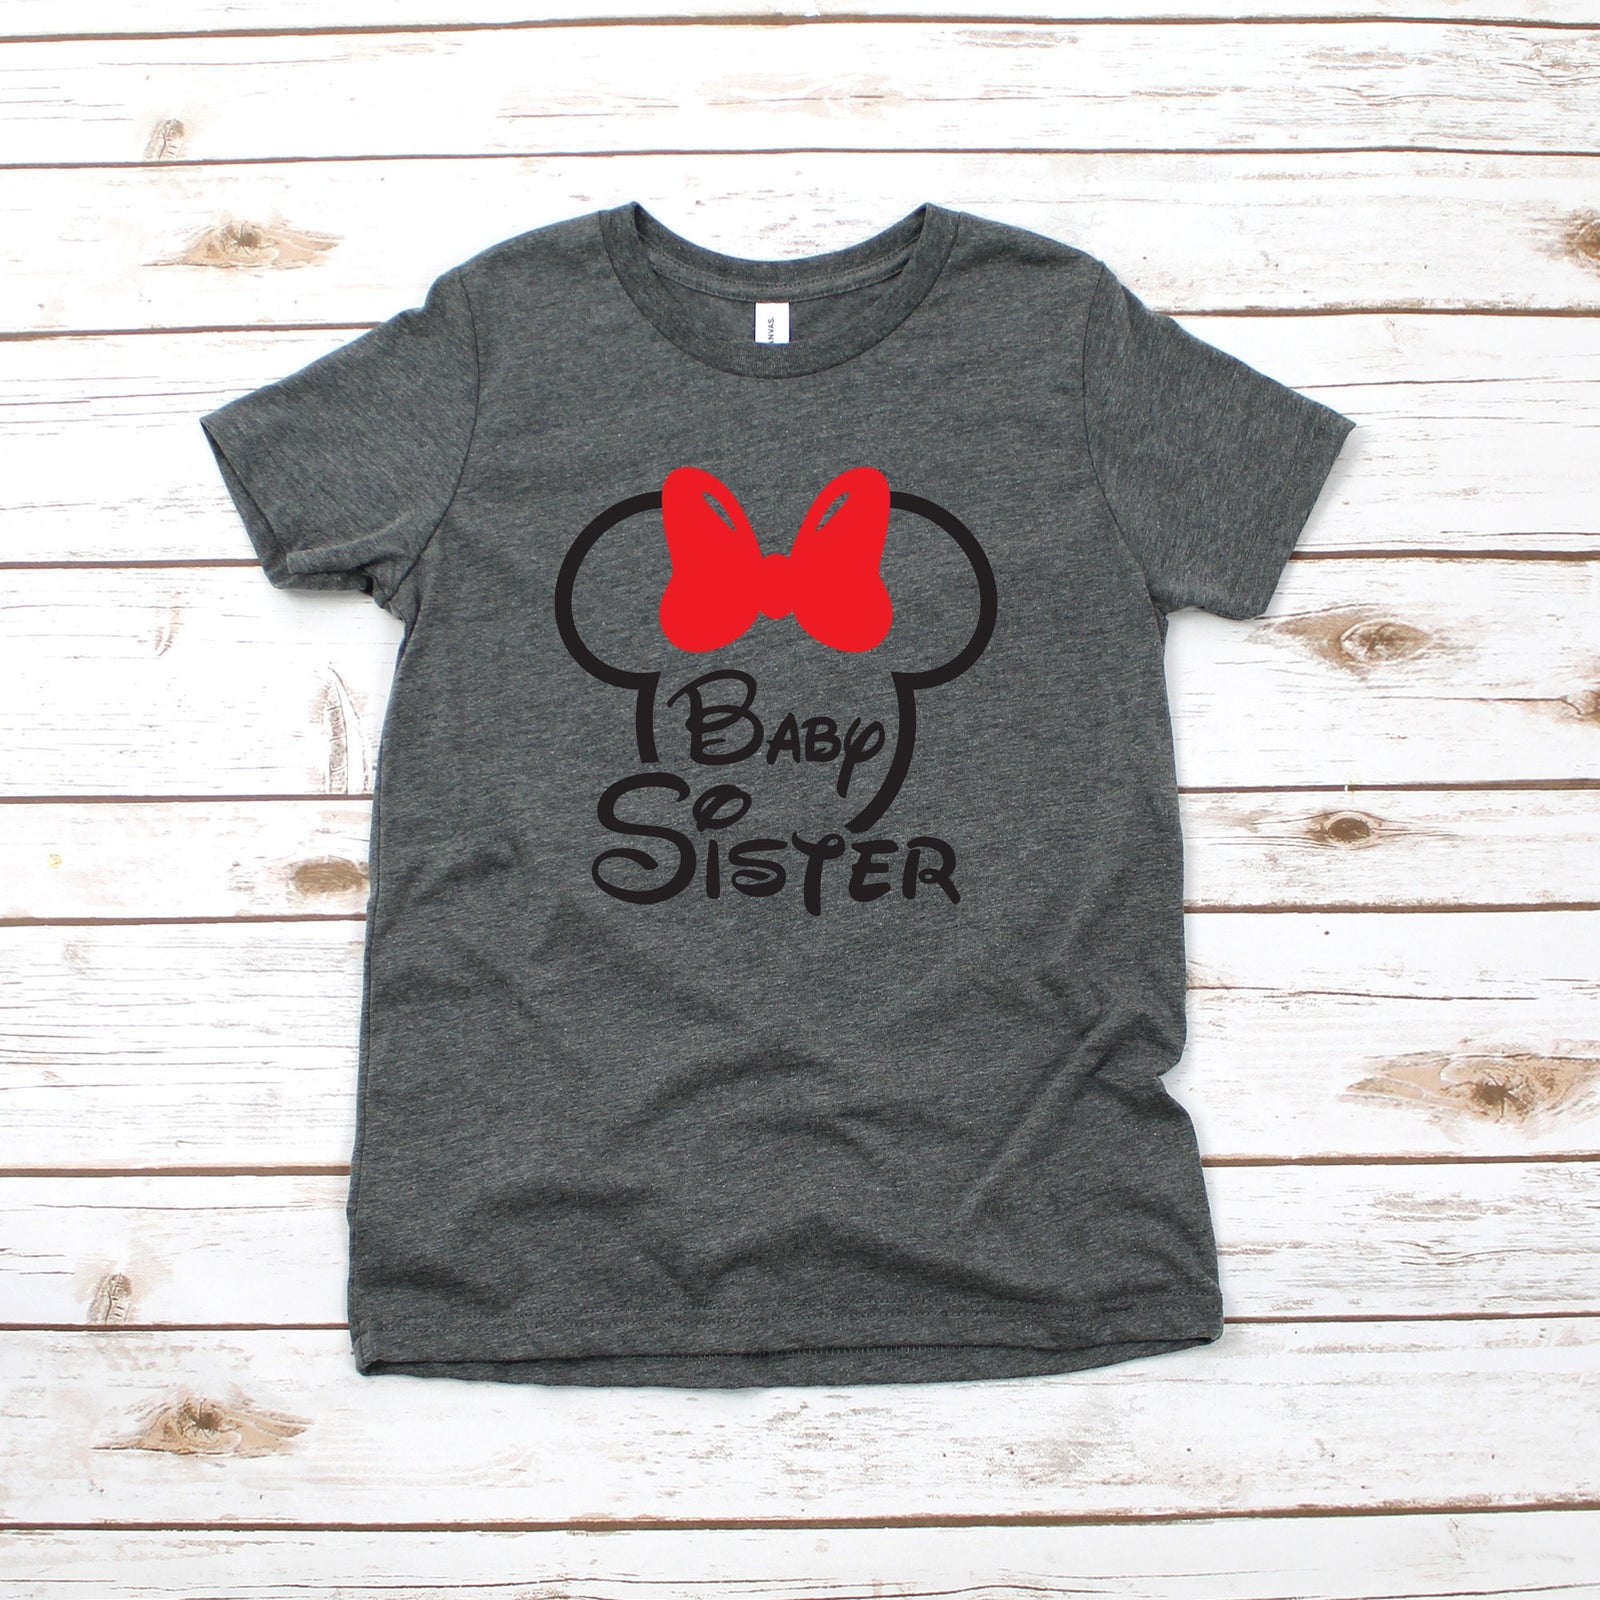 Baby Sister Mouse Minnie Kids T Shirt - Infant Toddler Youth Minnie Shirt - Disney Kids Shirts - Family Matching